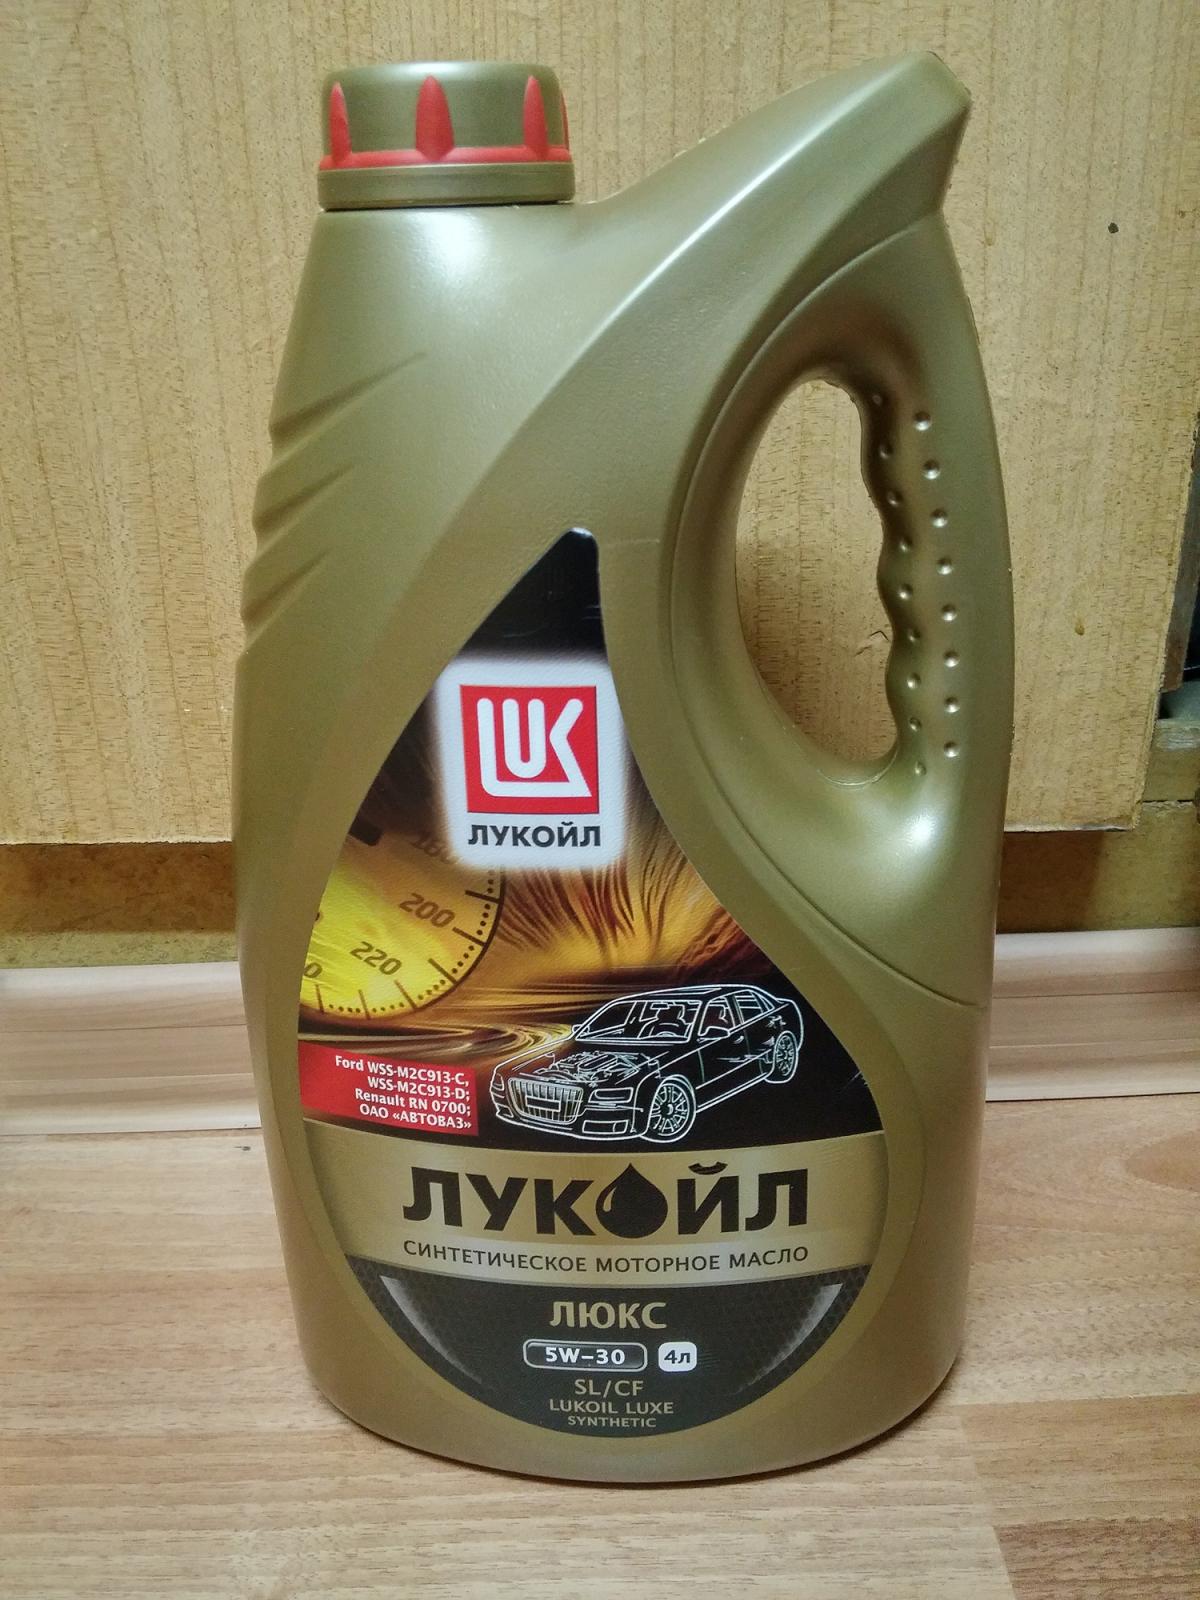 Масло моторное лукойл 5 л. Lukoil Luxe 5w-30. Лукойл Люкс 5w30 синтетика. Масло моторное Лукойл Люкс 5w-30 SL/CF синт. 4л. Лукойл Люкс 5w30 a5/b5.